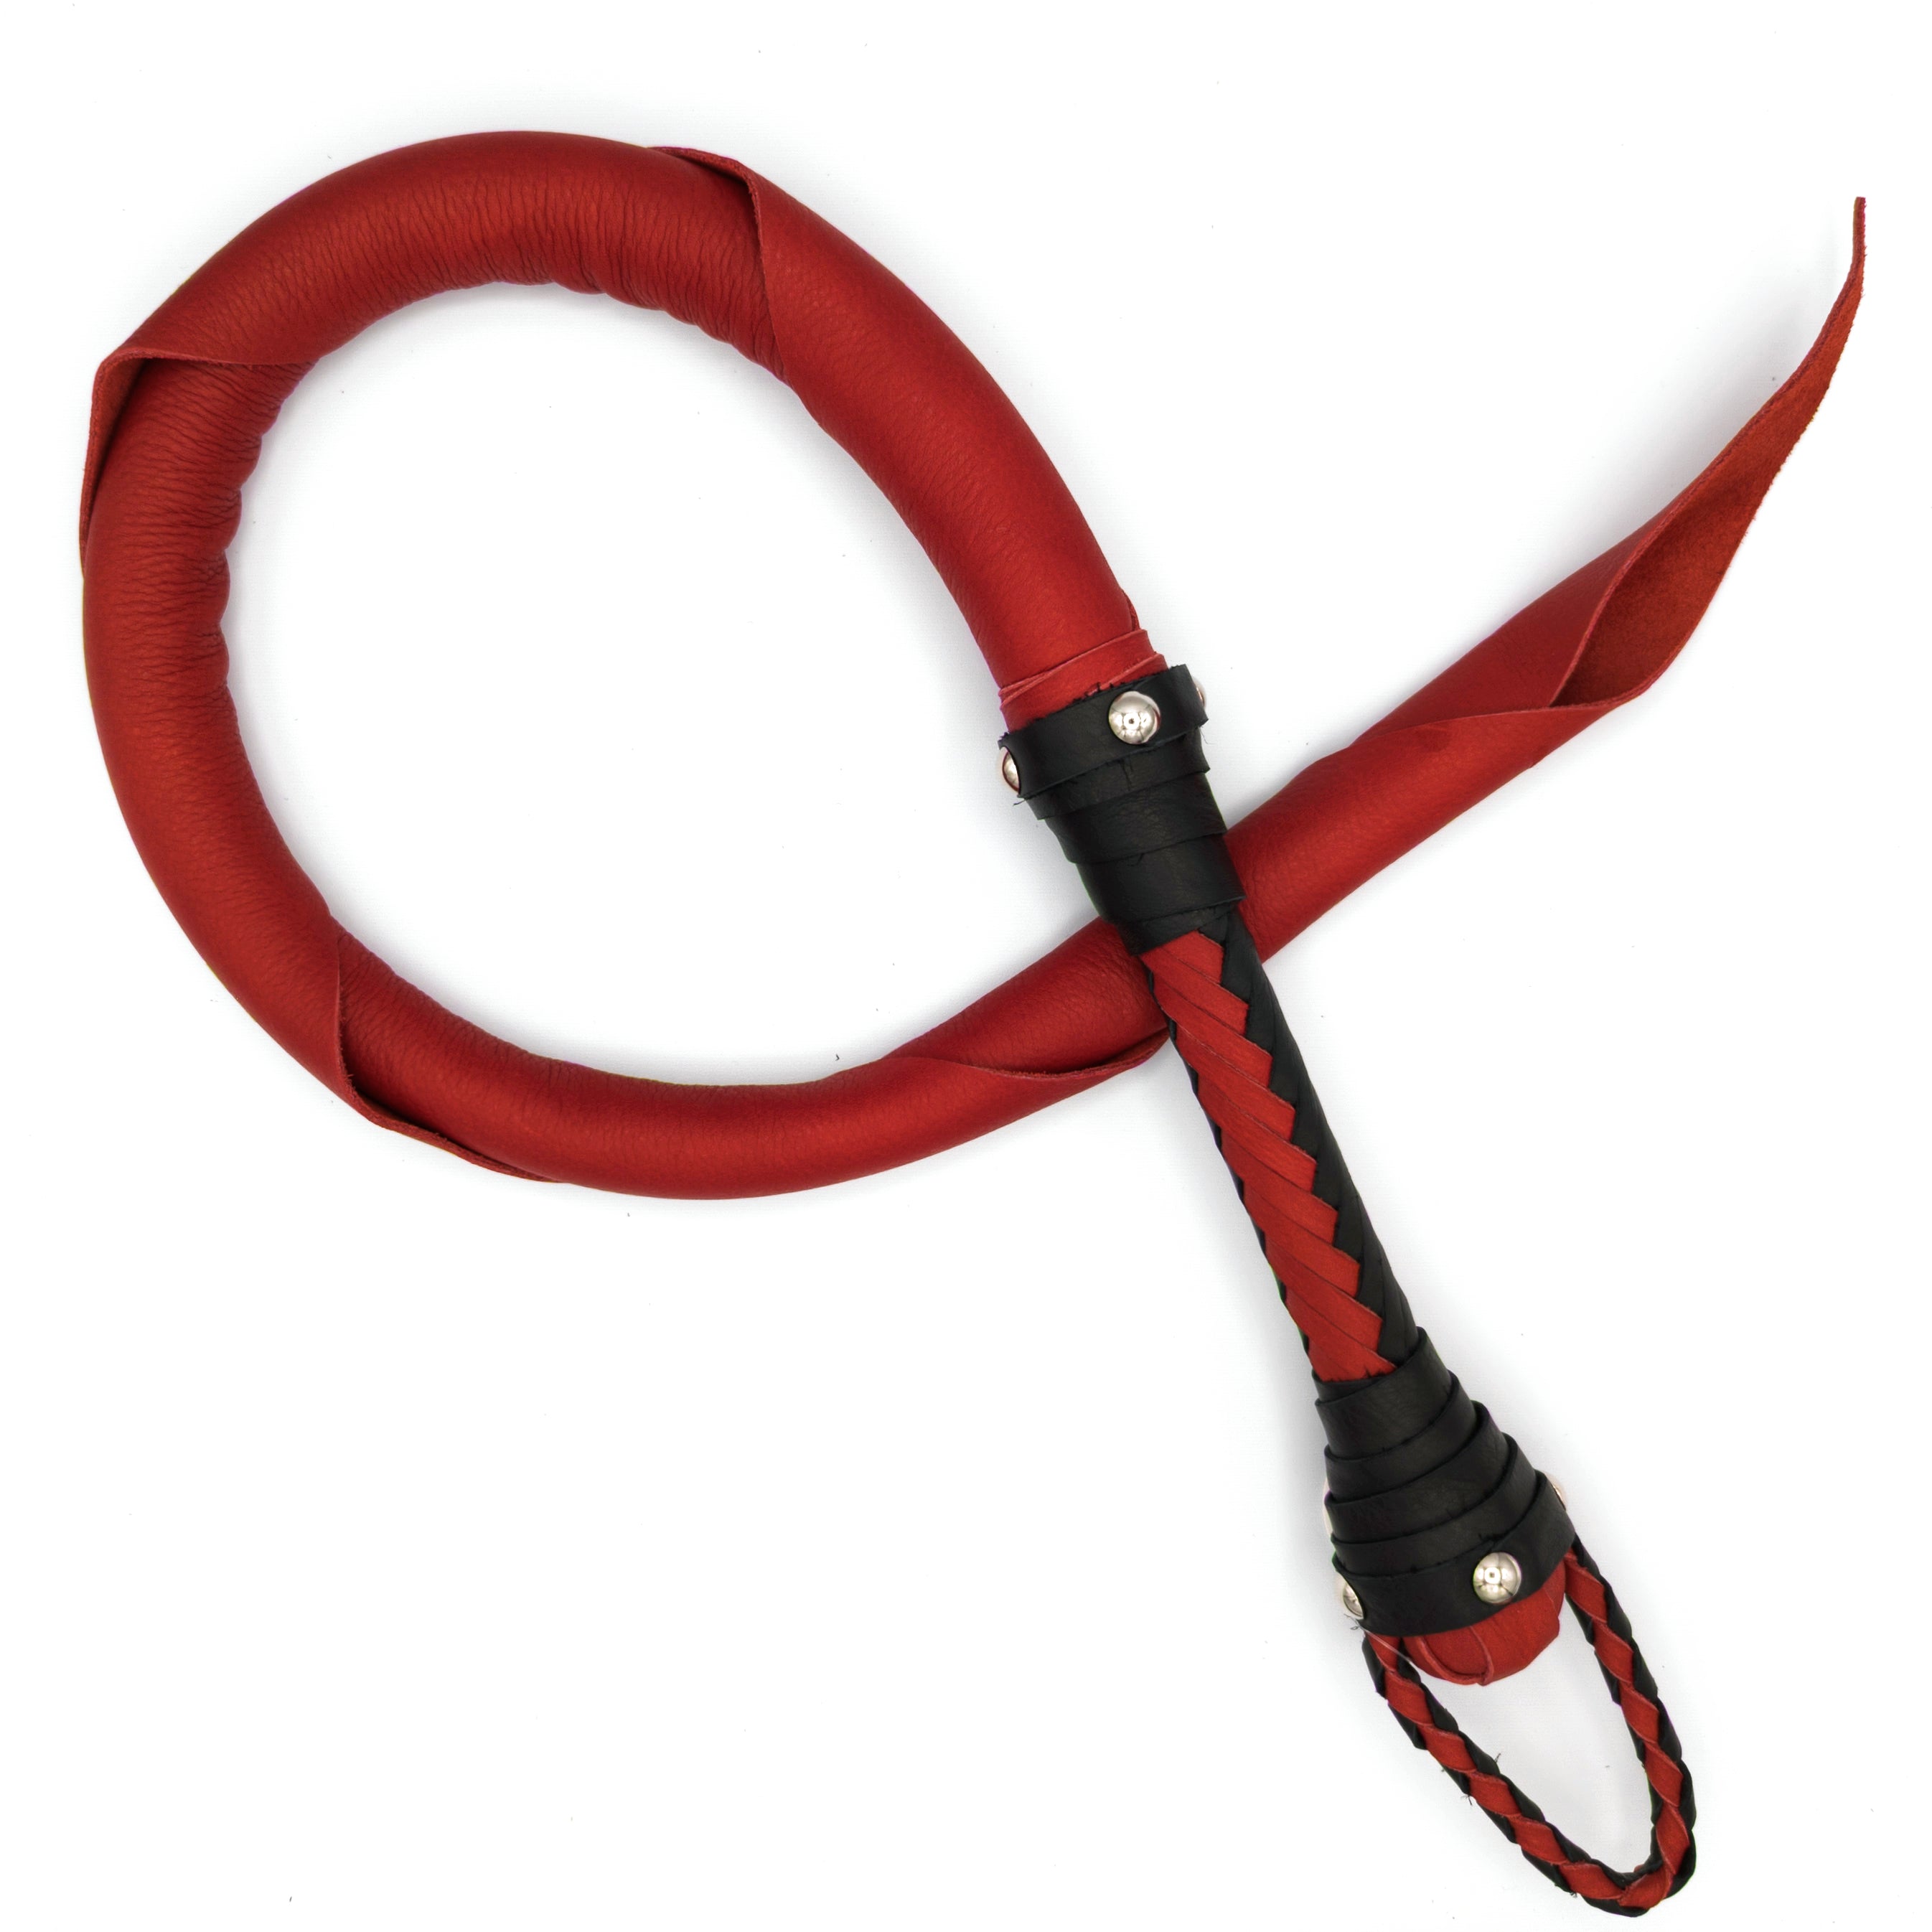 Dark Brown Leather Bull Whip - 8' Handcrafted | BUDK.com